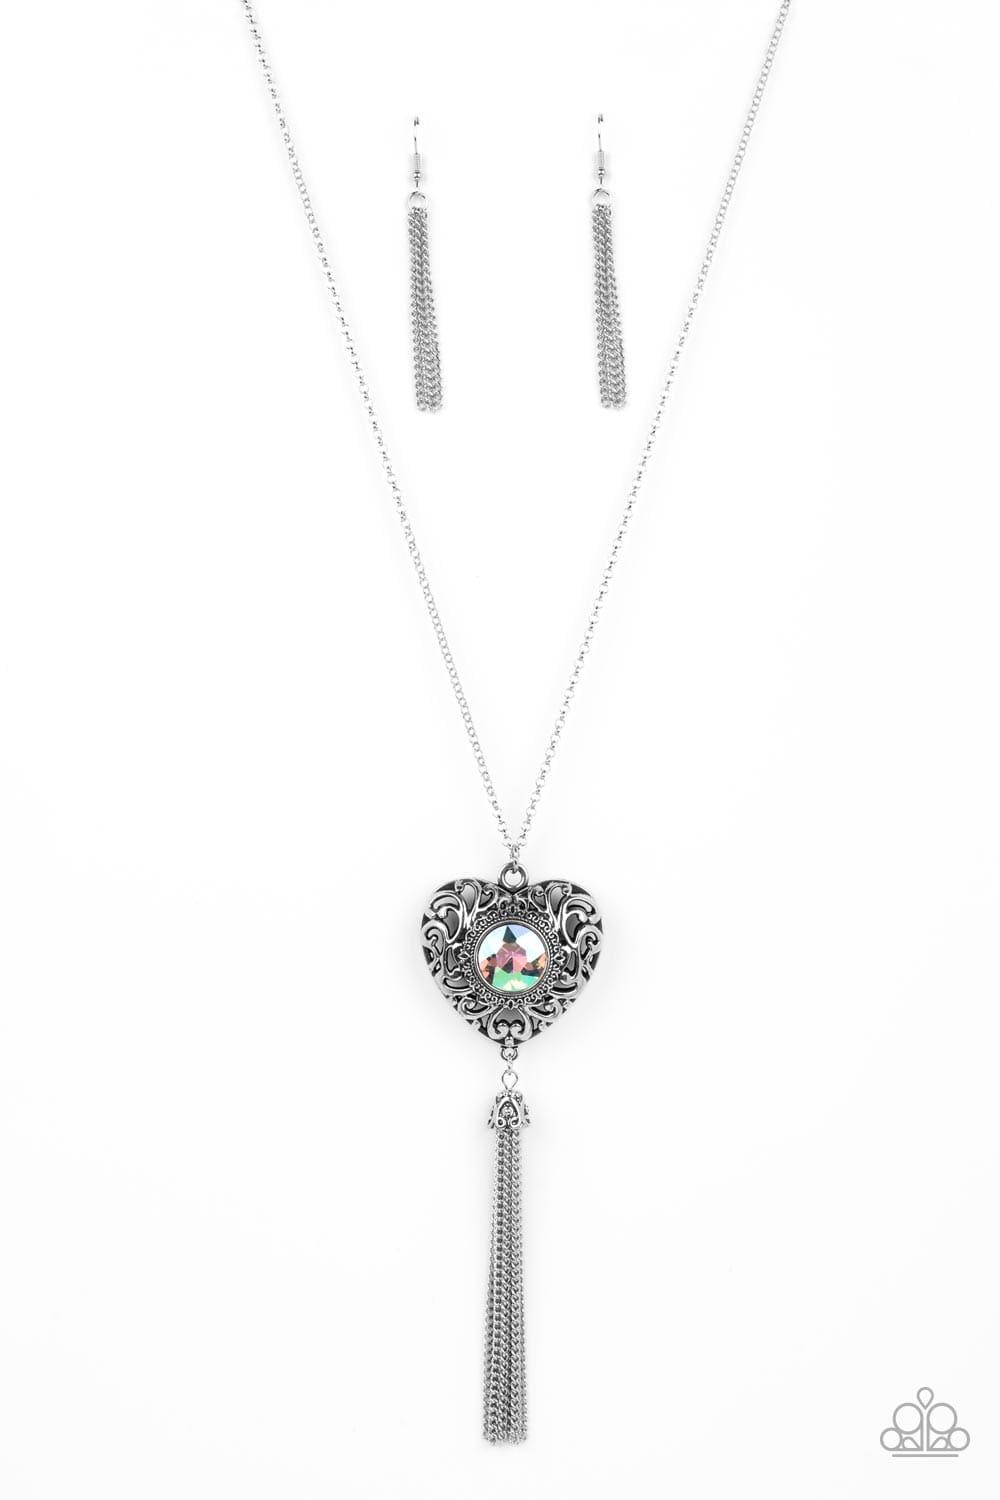 Paparazzi Accessories - Prismatic Passion - Green Necklace - Bling by JessieK